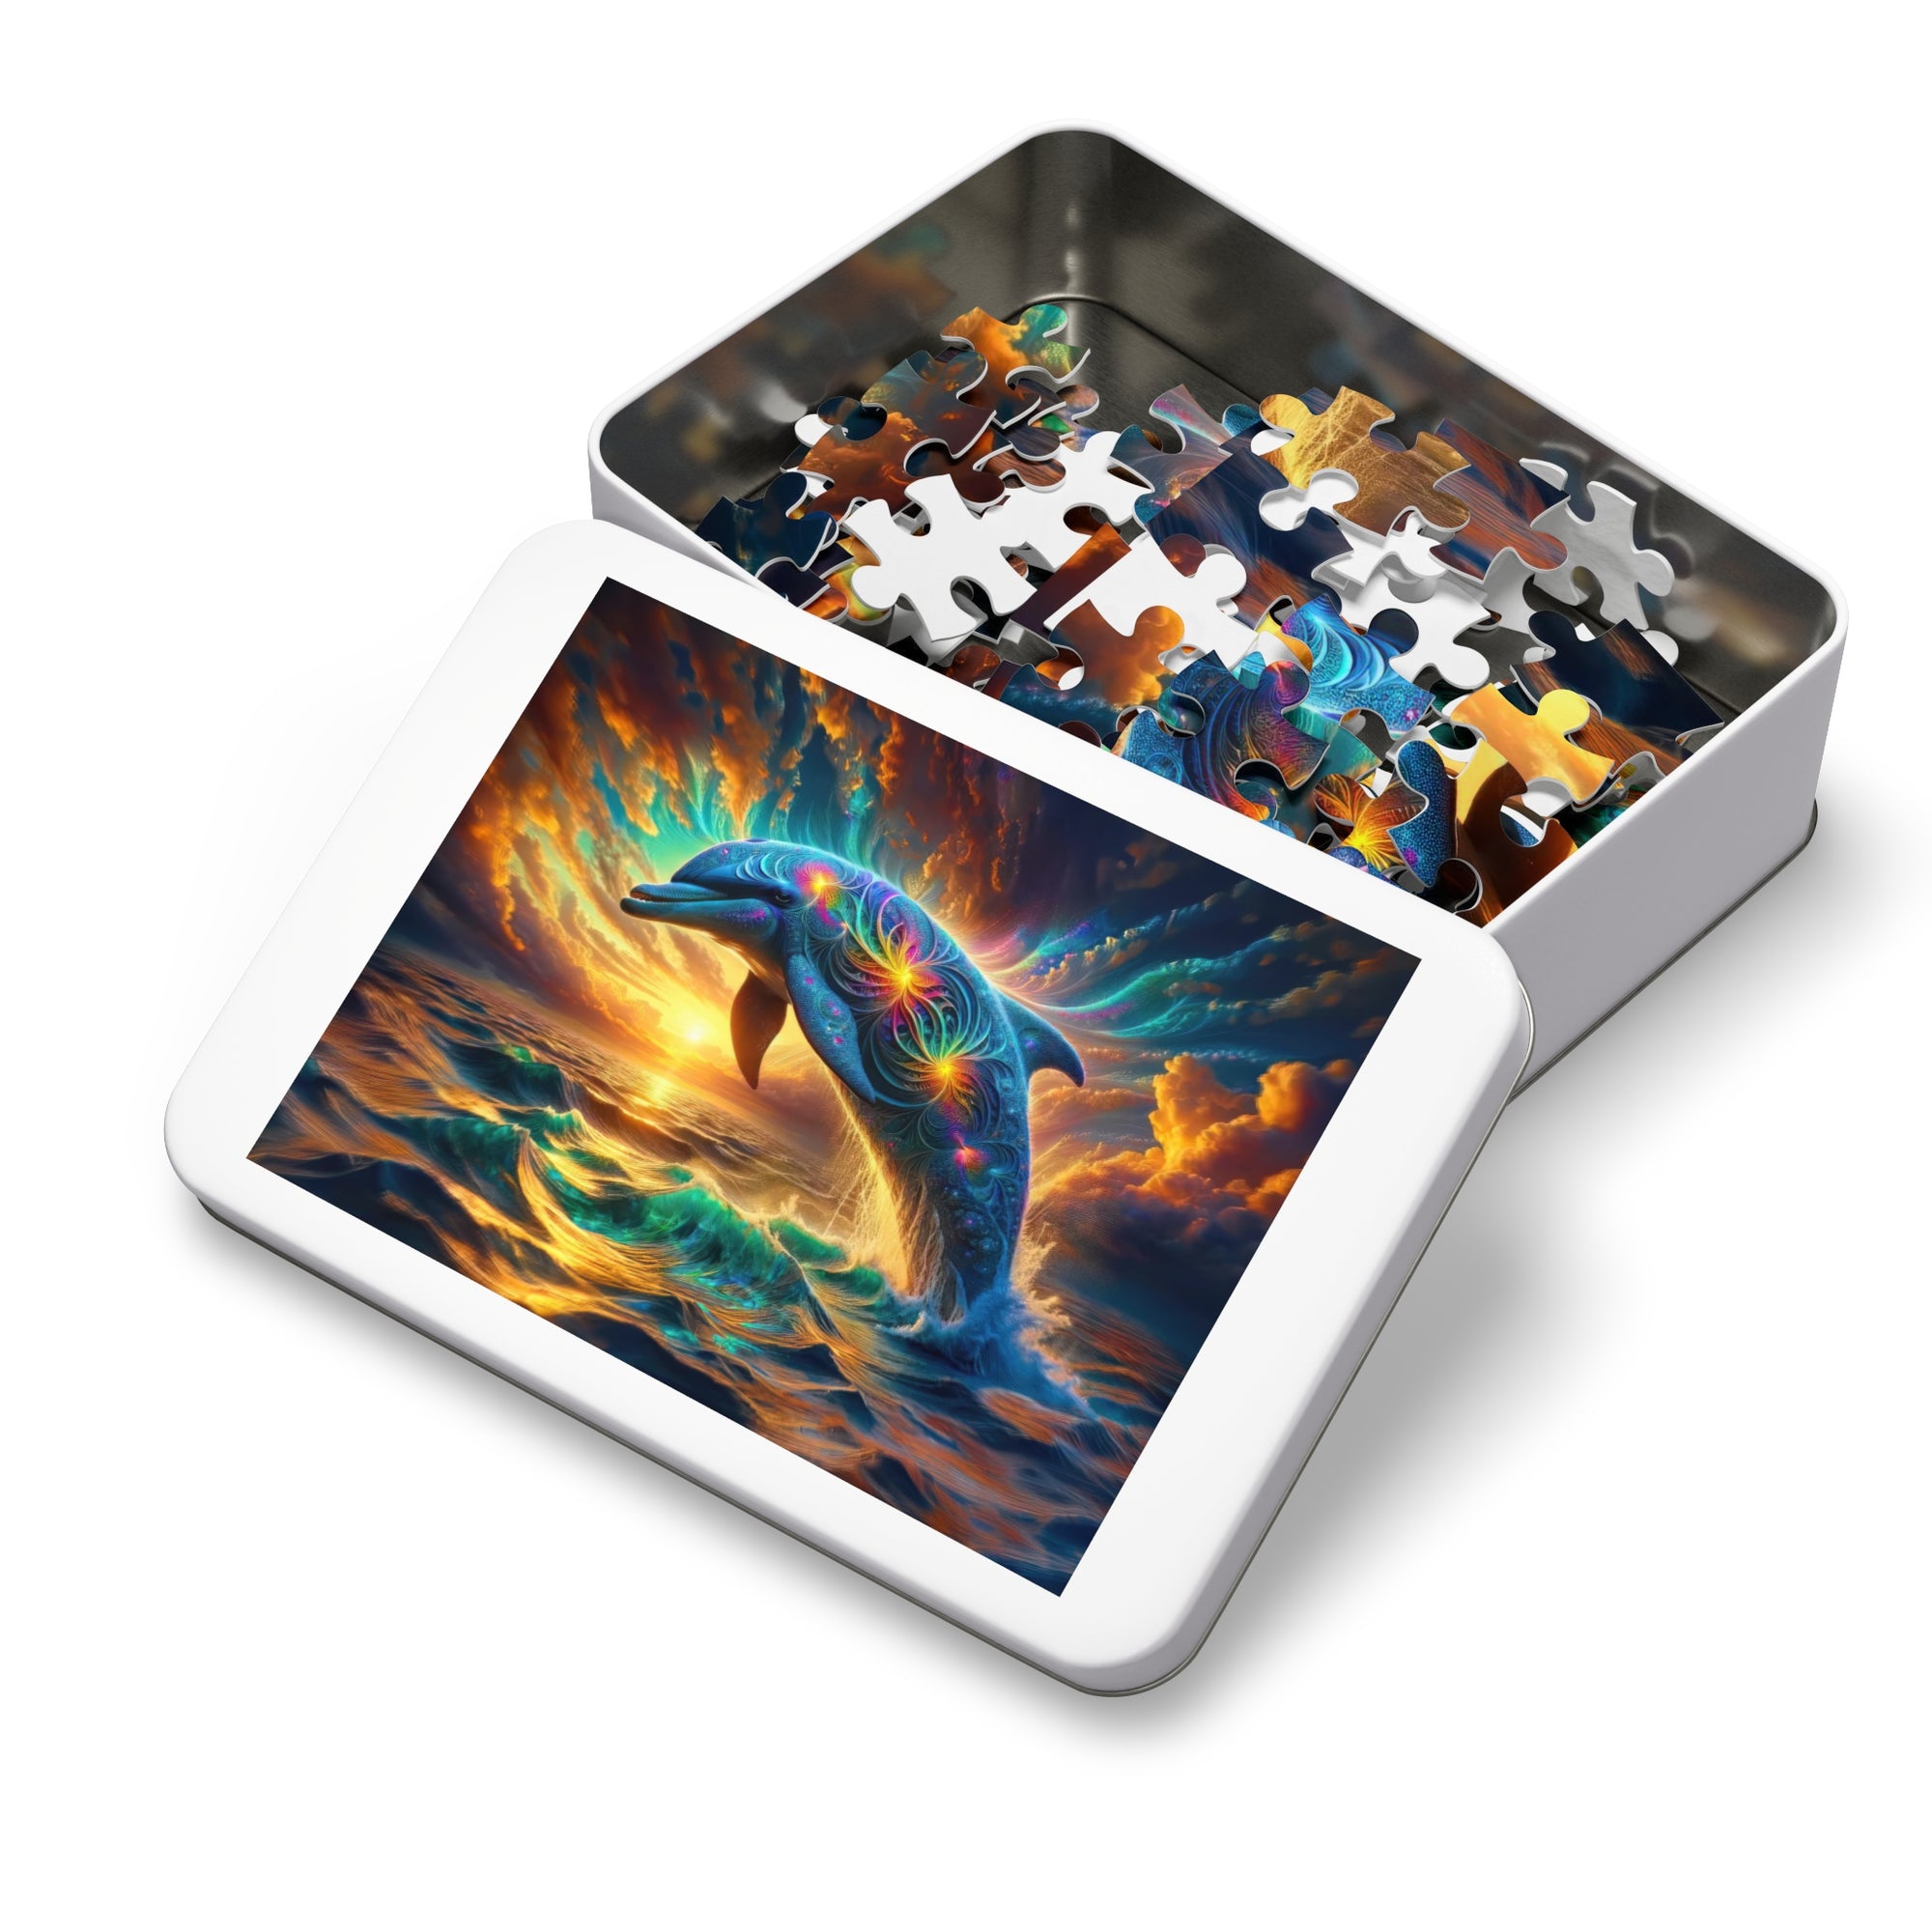 Quantum Leap of the Cosmic Dolphin Jigsaw Puzzle